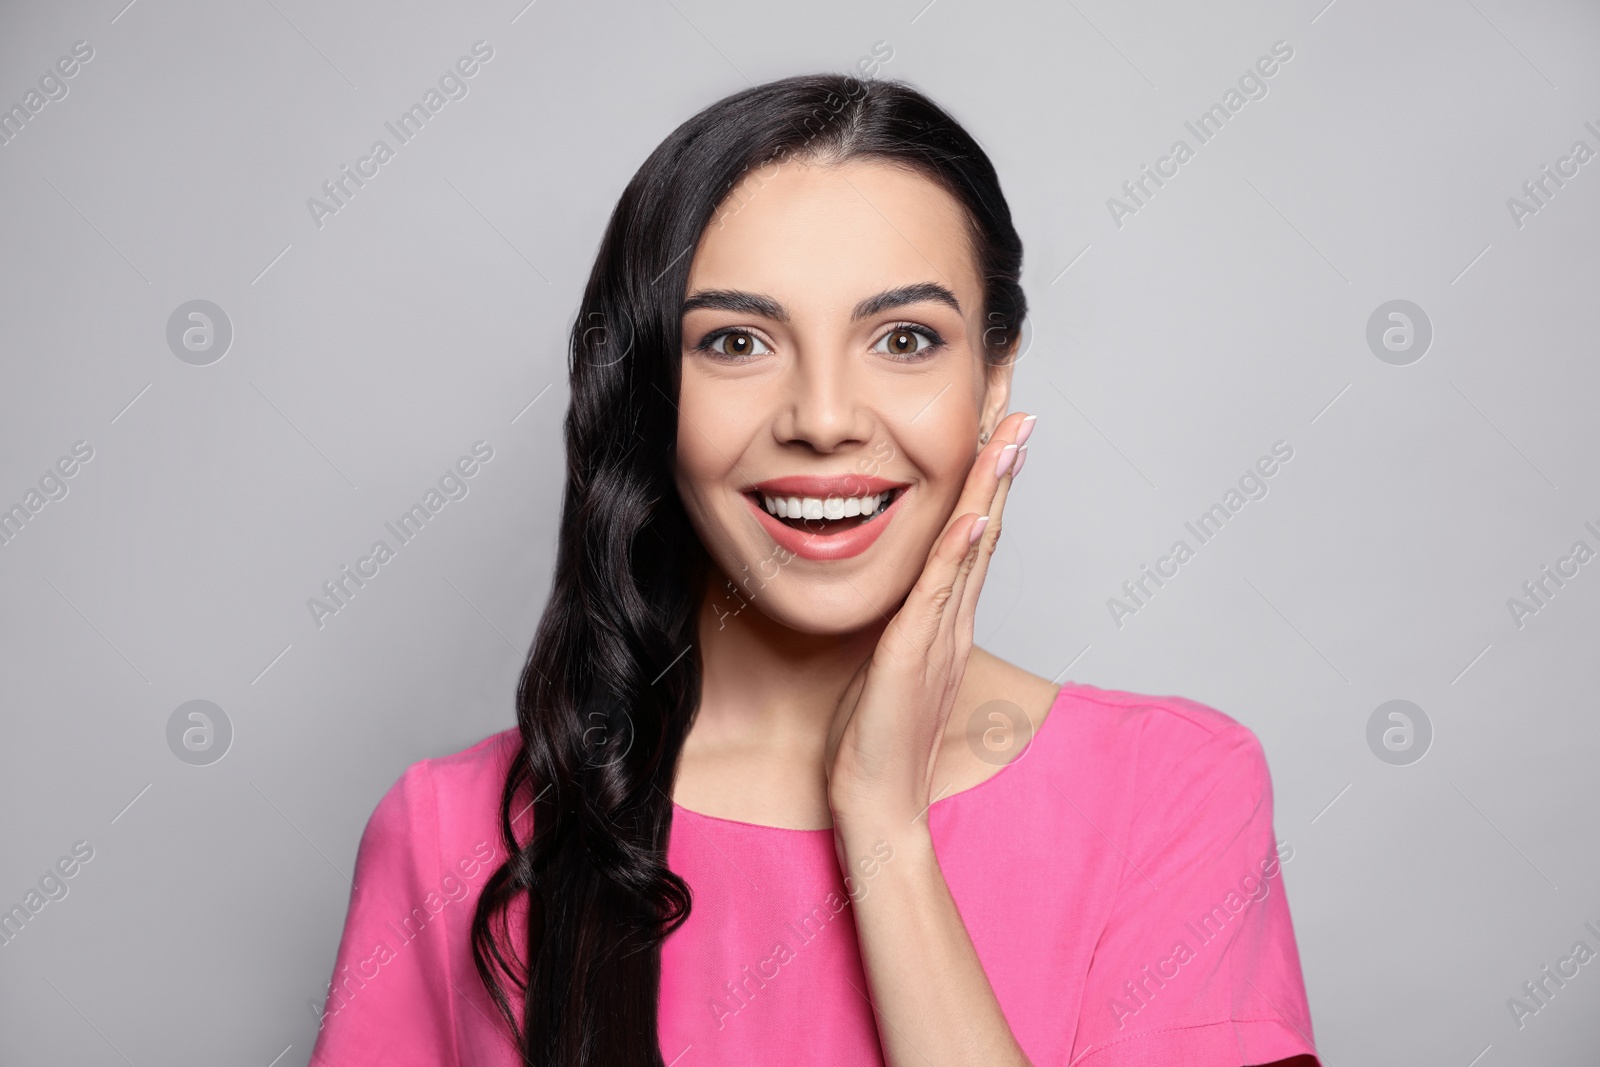 Photo of Portrait of surprised woman on grey background